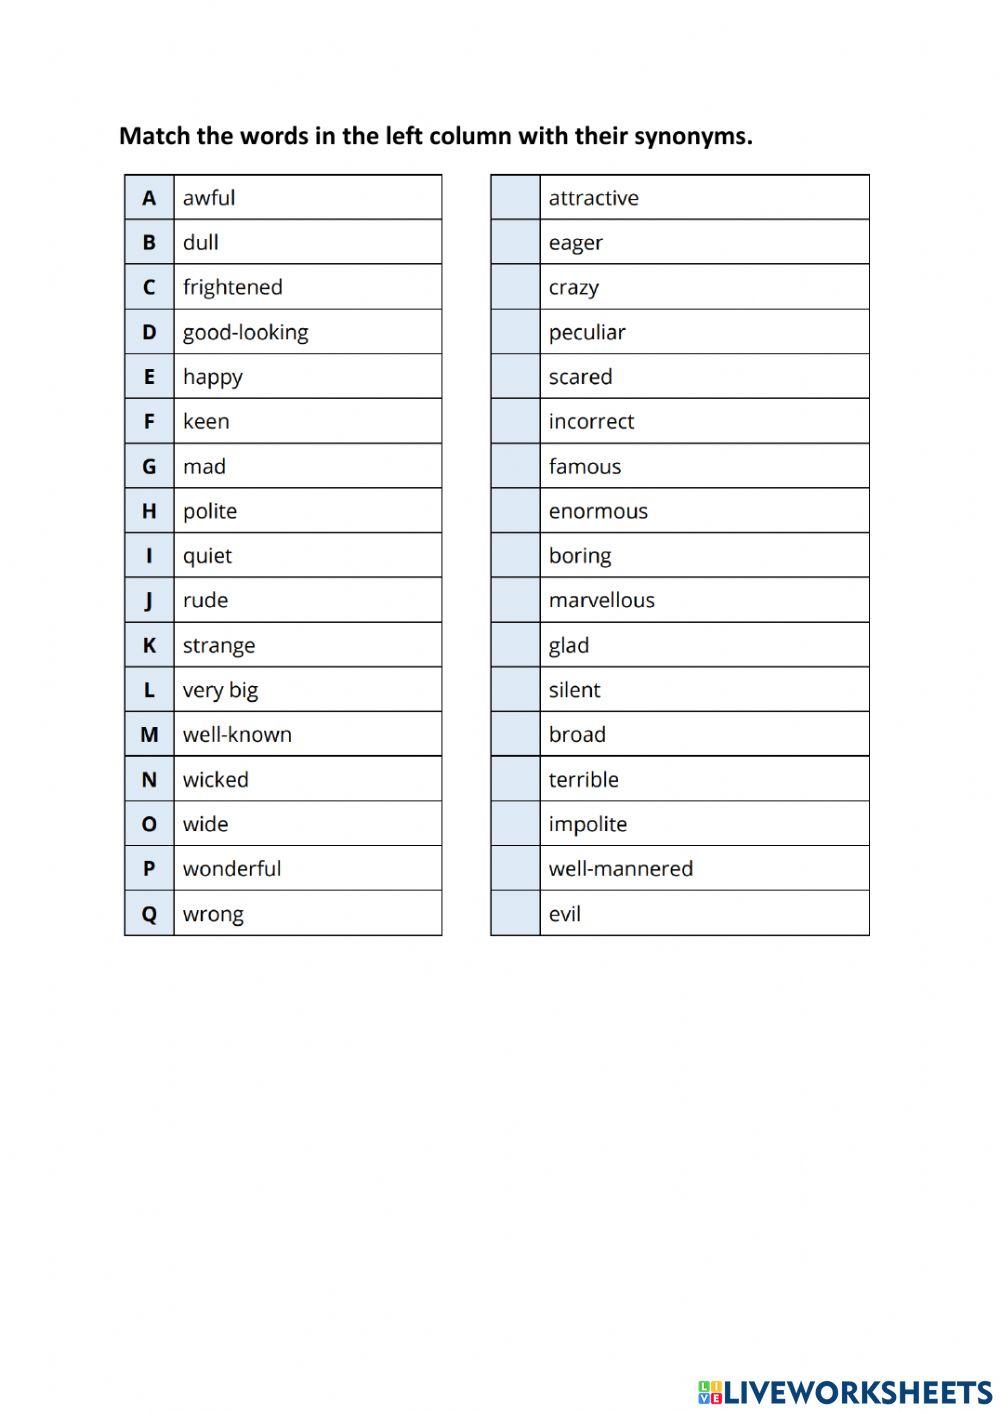 Choosing synonyms - revision online exercise for